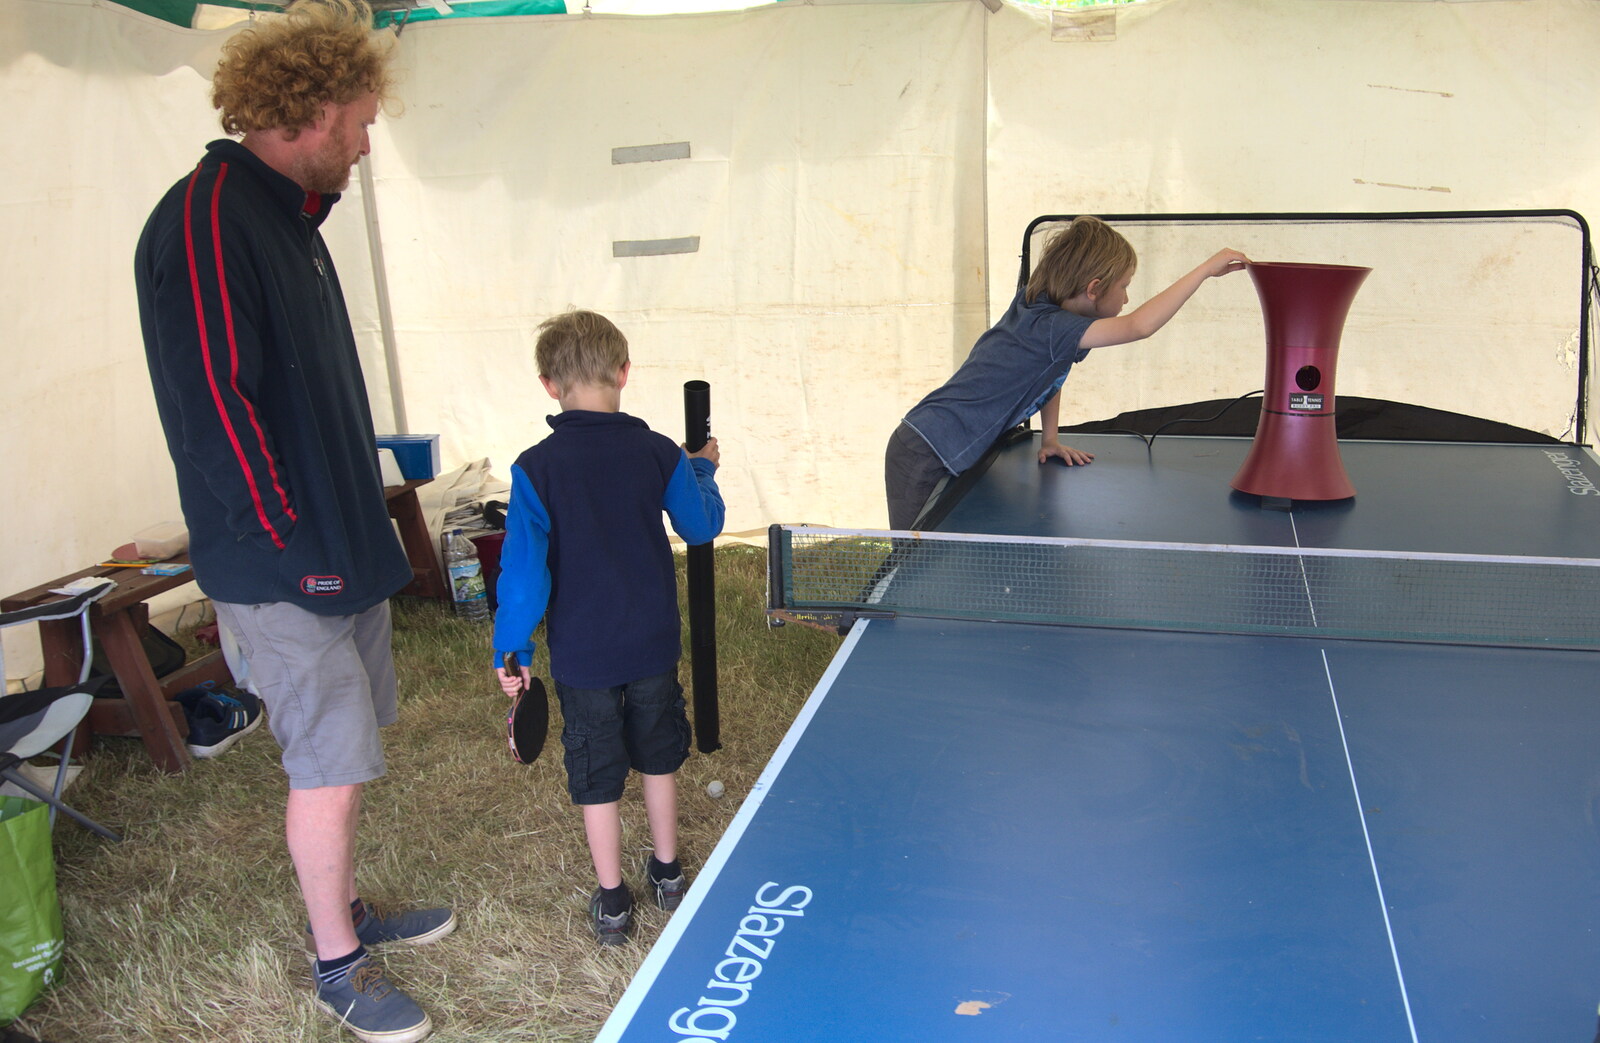 Wavy in the Table Tennis tent from The Formerly-Known-As-The-Eye-Show, Palgrave, Suffolk - 17th June 2018